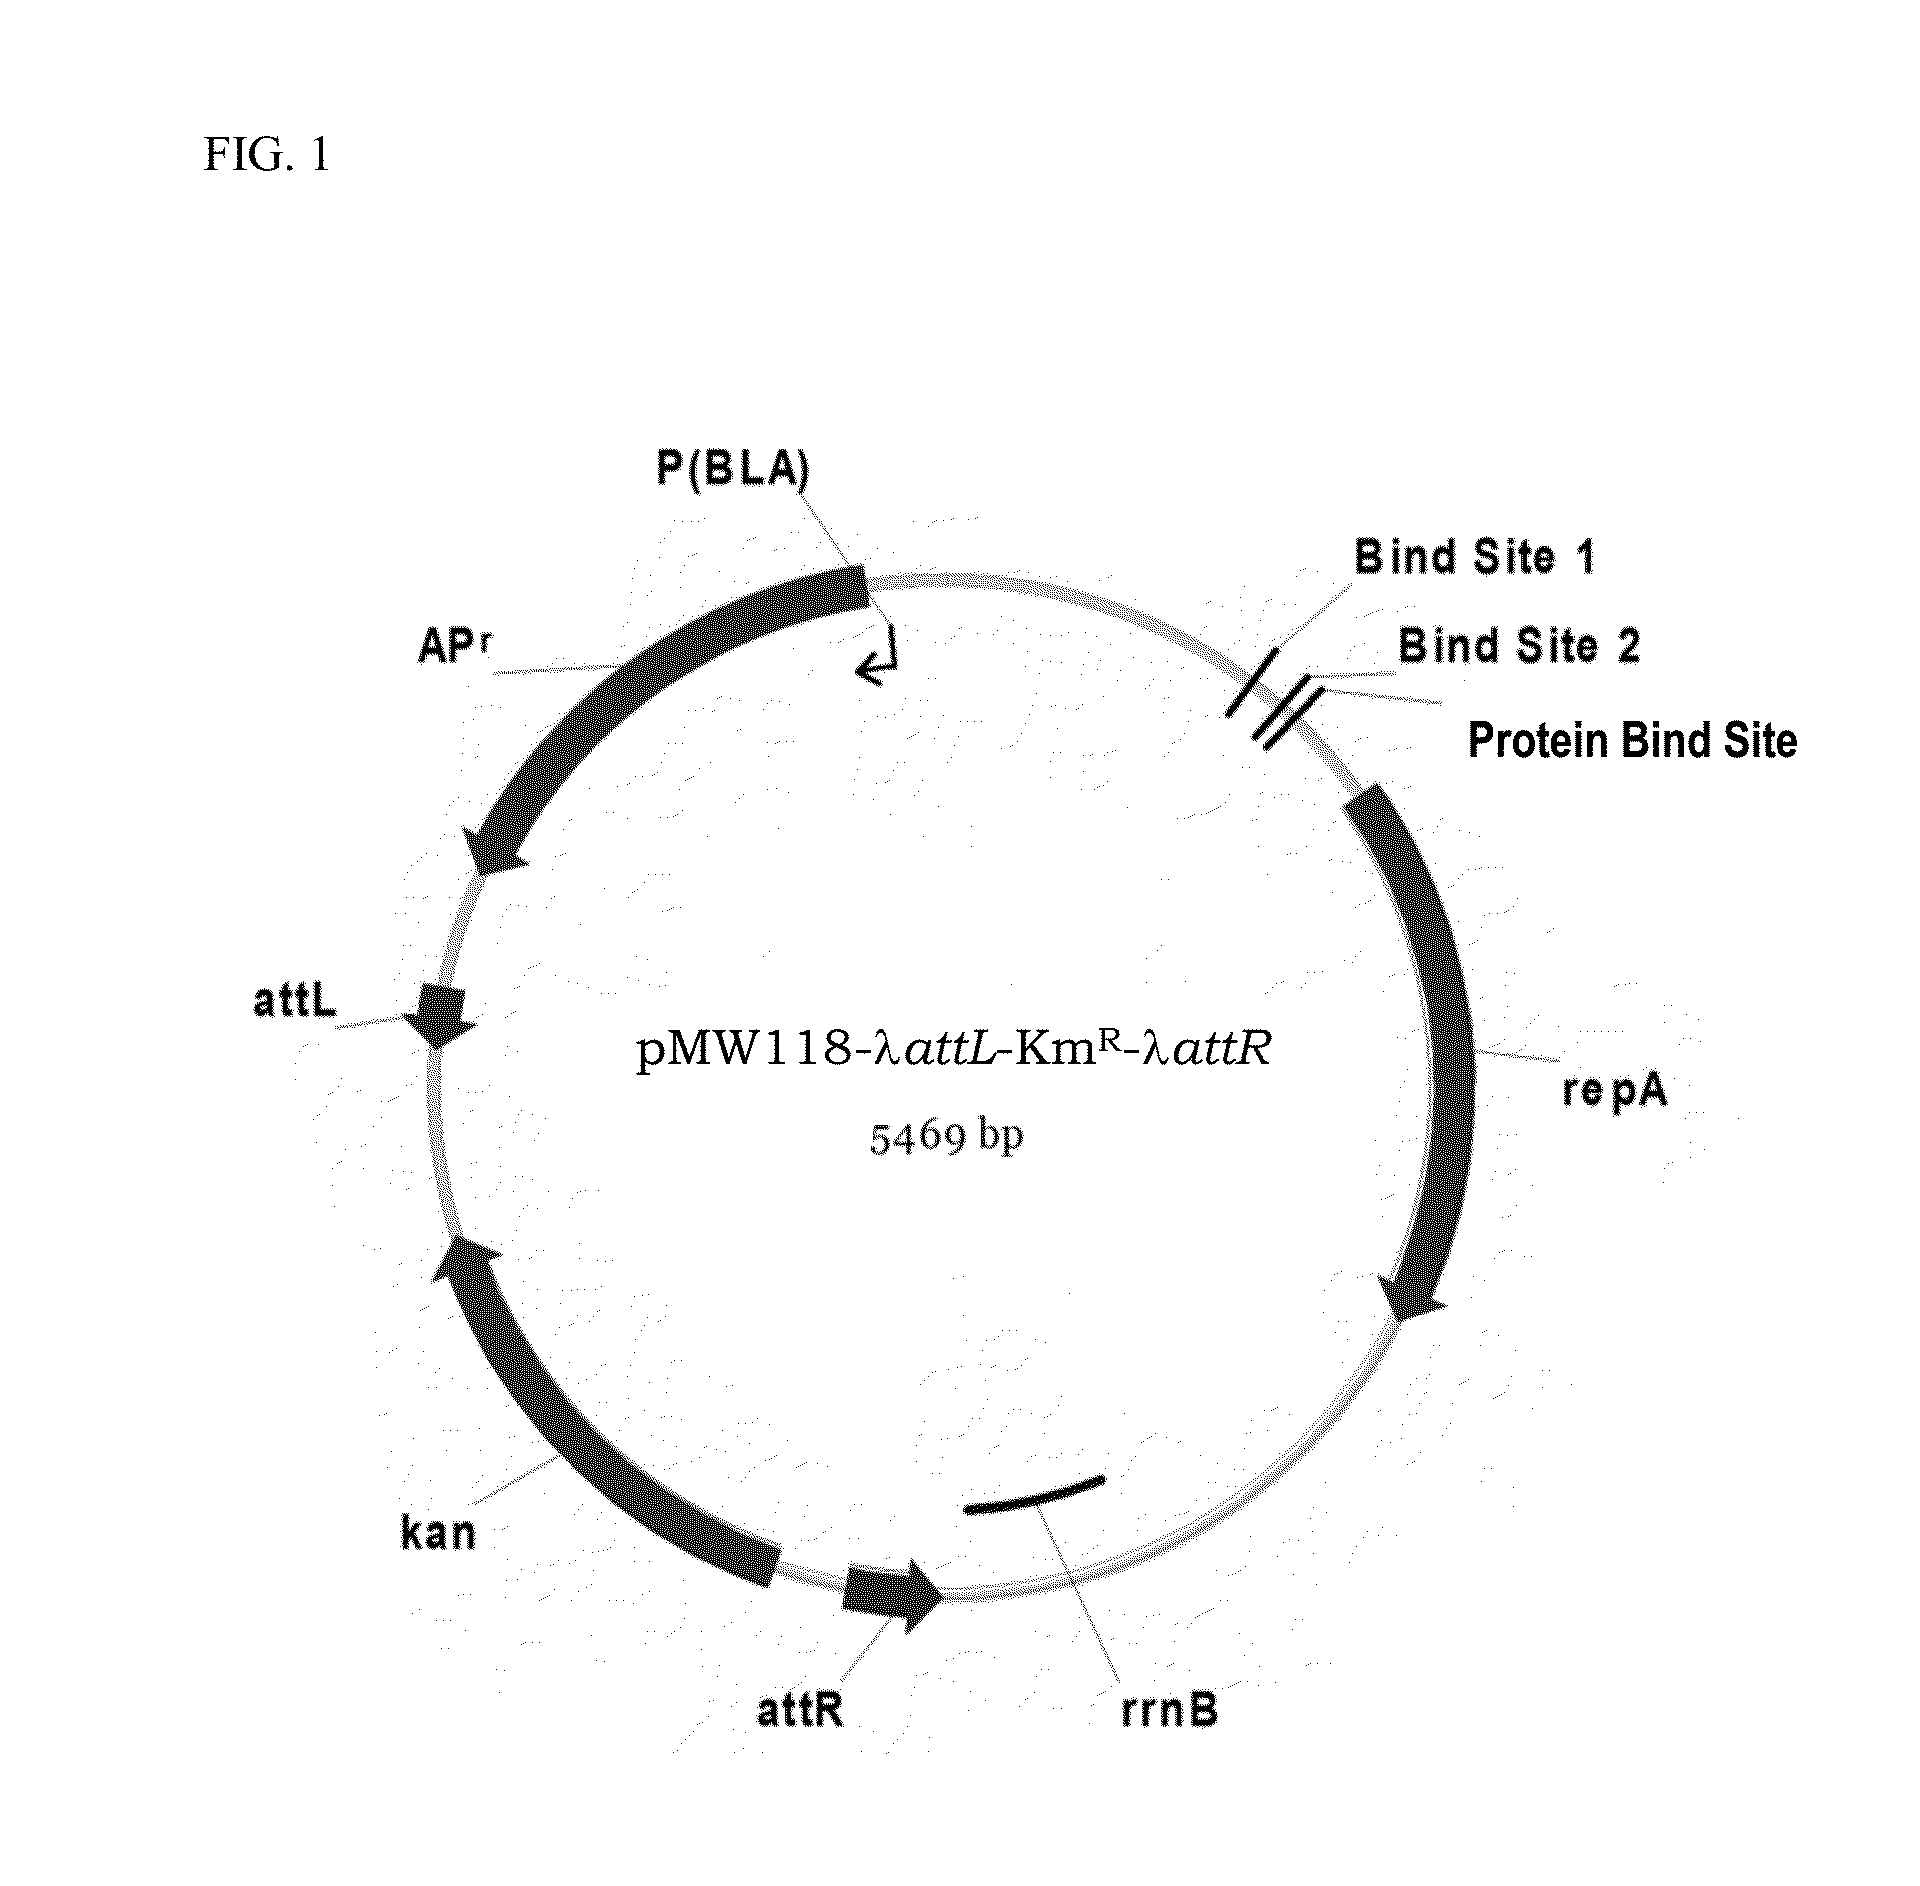 Method for Producing an L-Amino Acid Using a Bacterium of the Family Enterobacteriaceae Having Attenuated Expression of a Phosphate Transporter-Encoding Gene